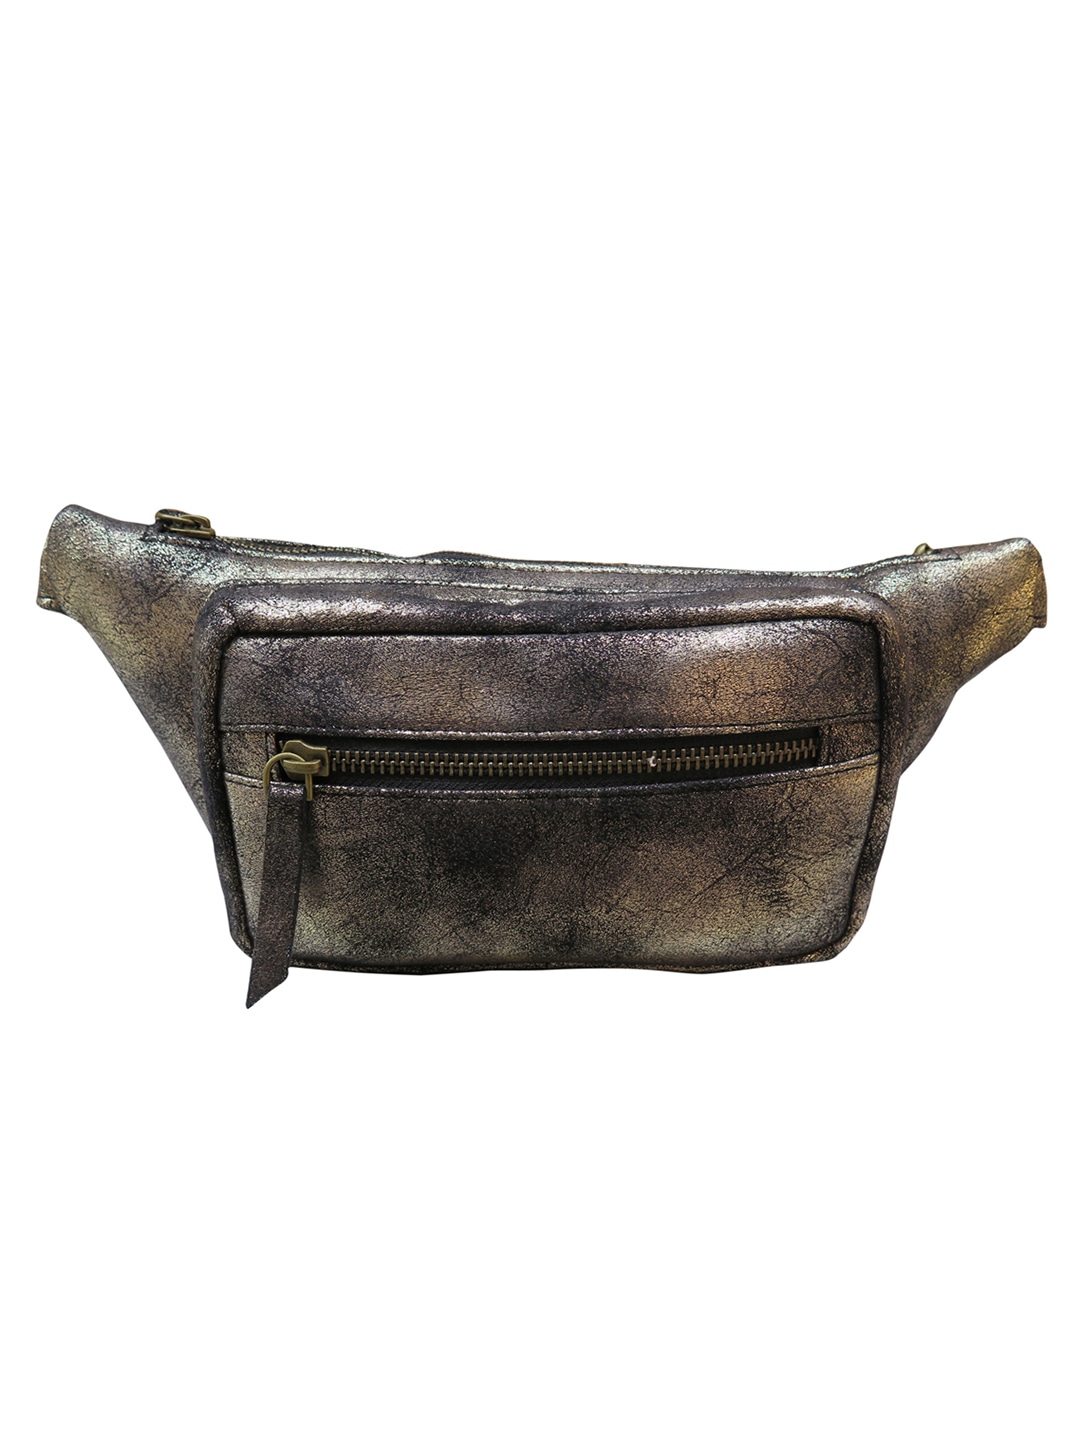 Accessories Waist Pouch | Spice Art Unisex Copper-Toned Solid Fanny Pack With Antique Finish Detail - XJ50476